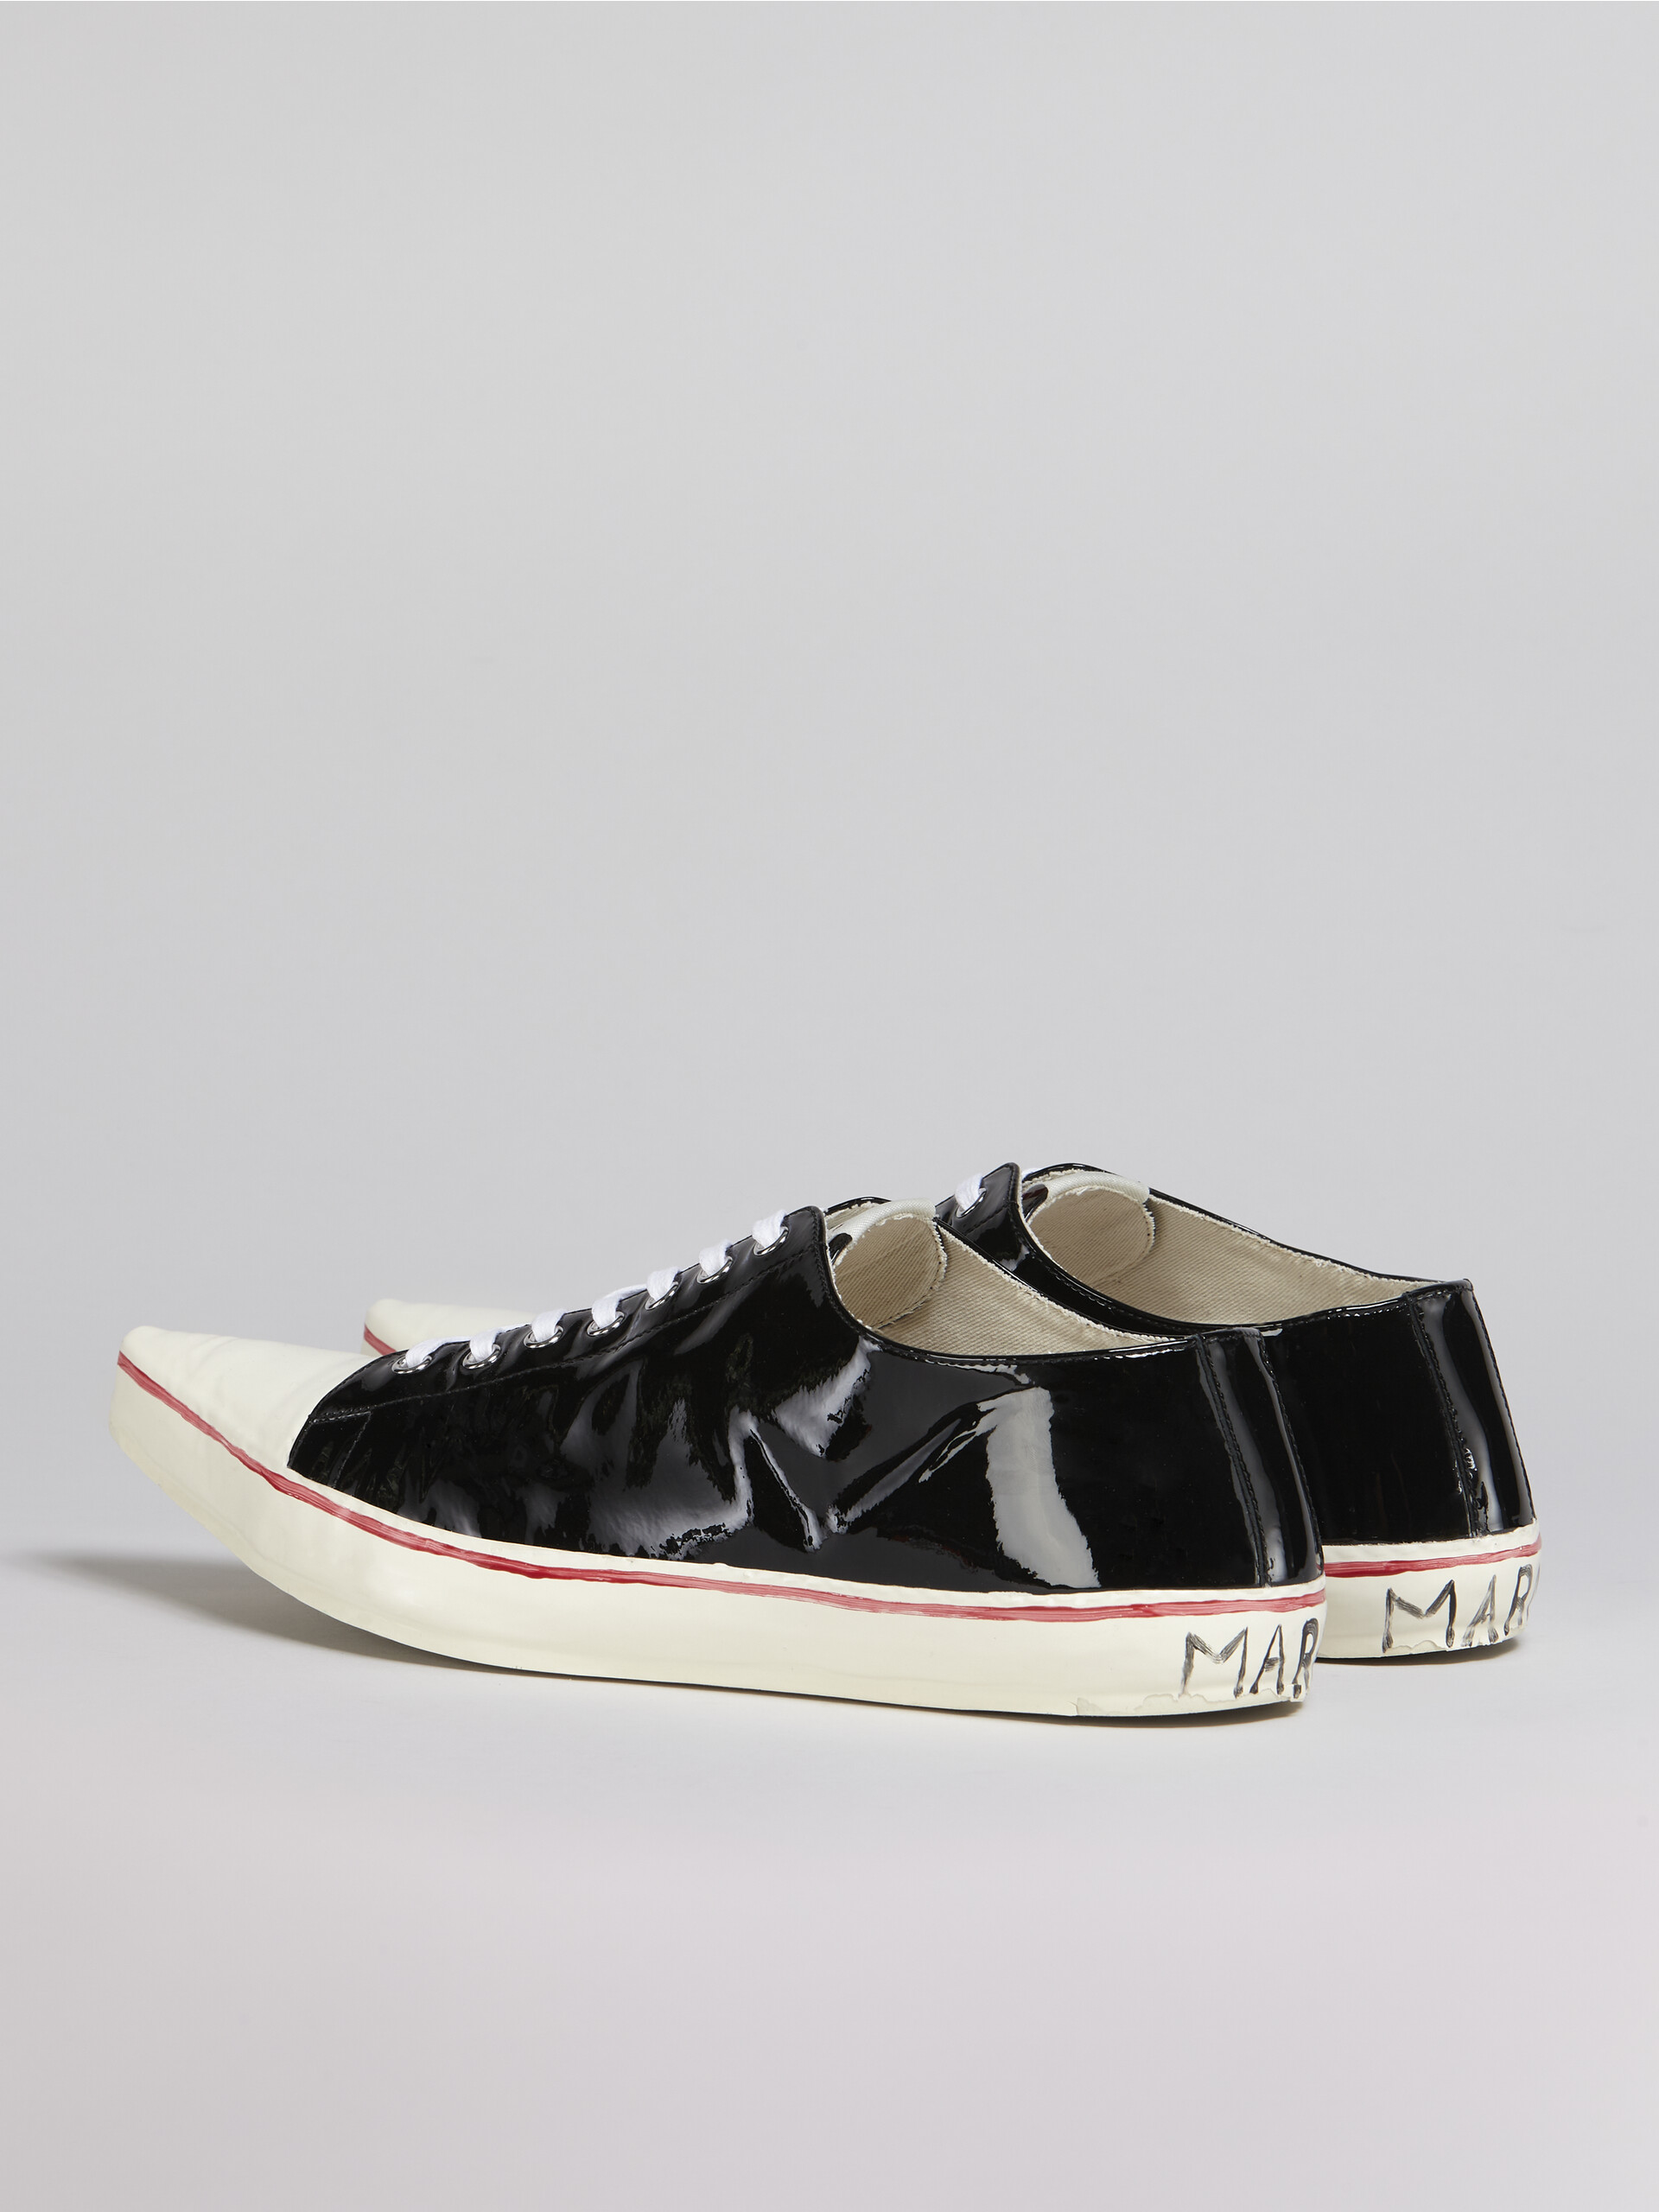 Patent leather GOOEY low-top sneaker - Sneakers - Image 3